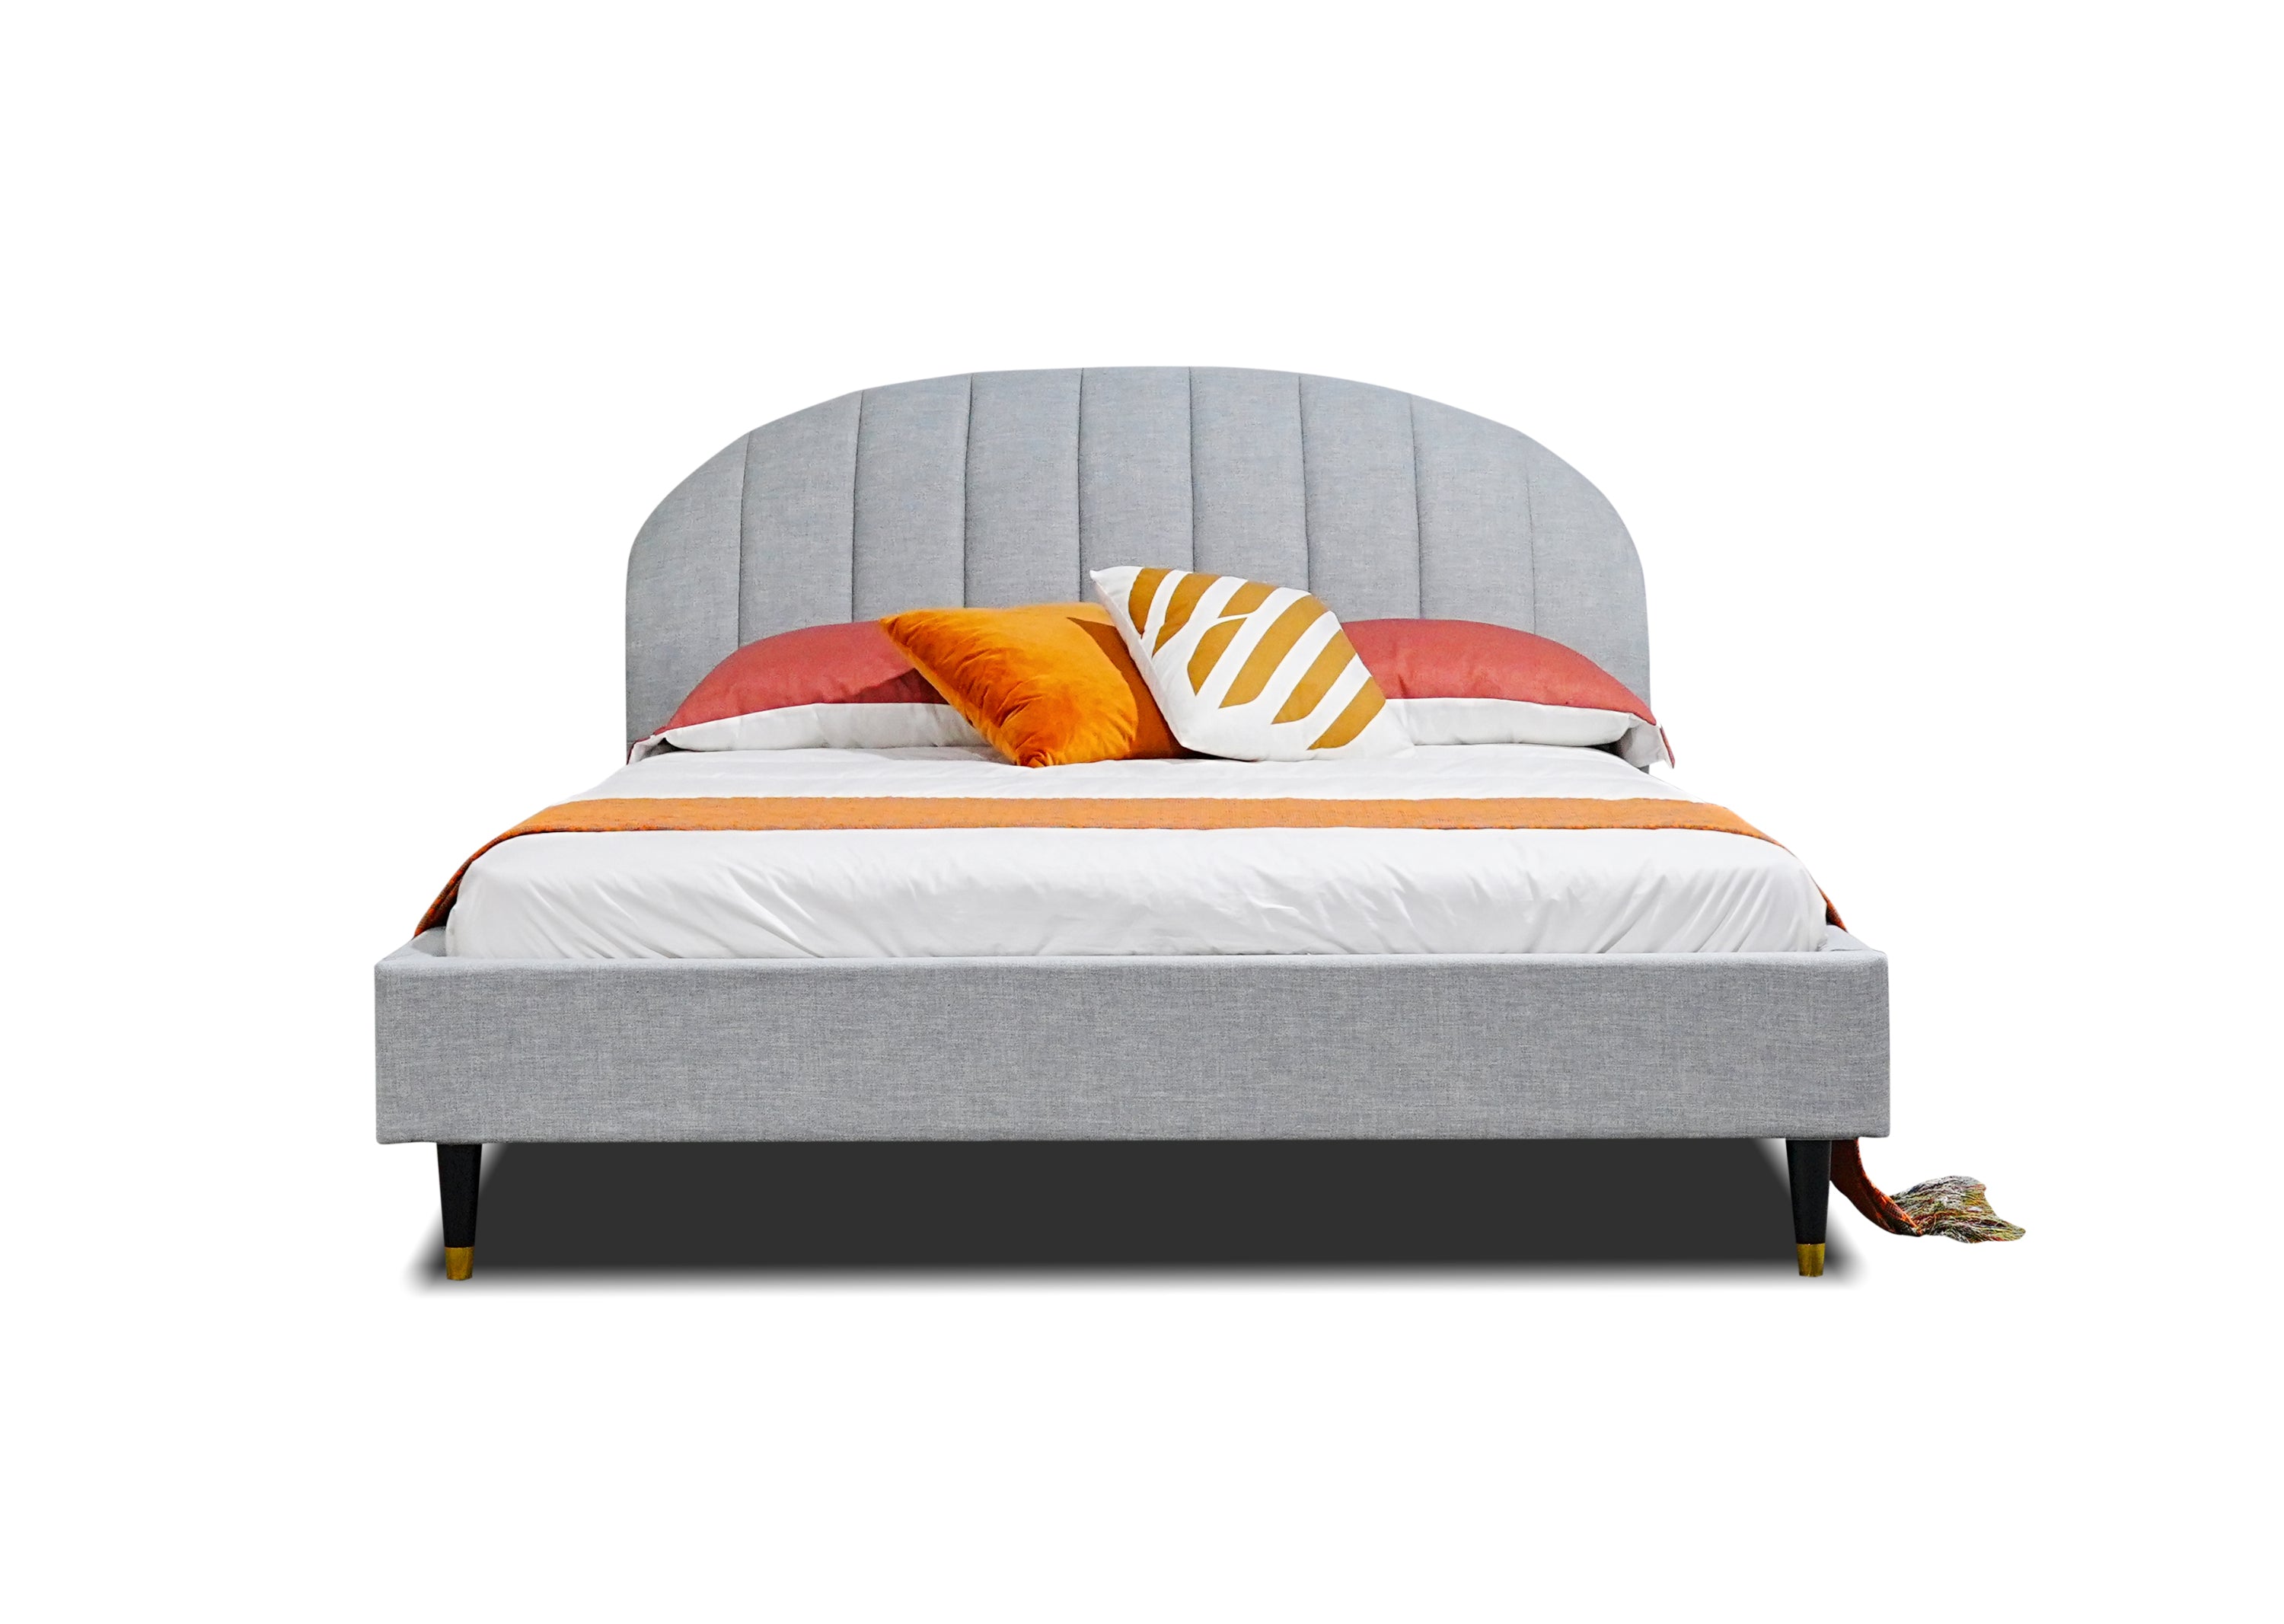 Queen size Modern Fabric Bed (Gray)